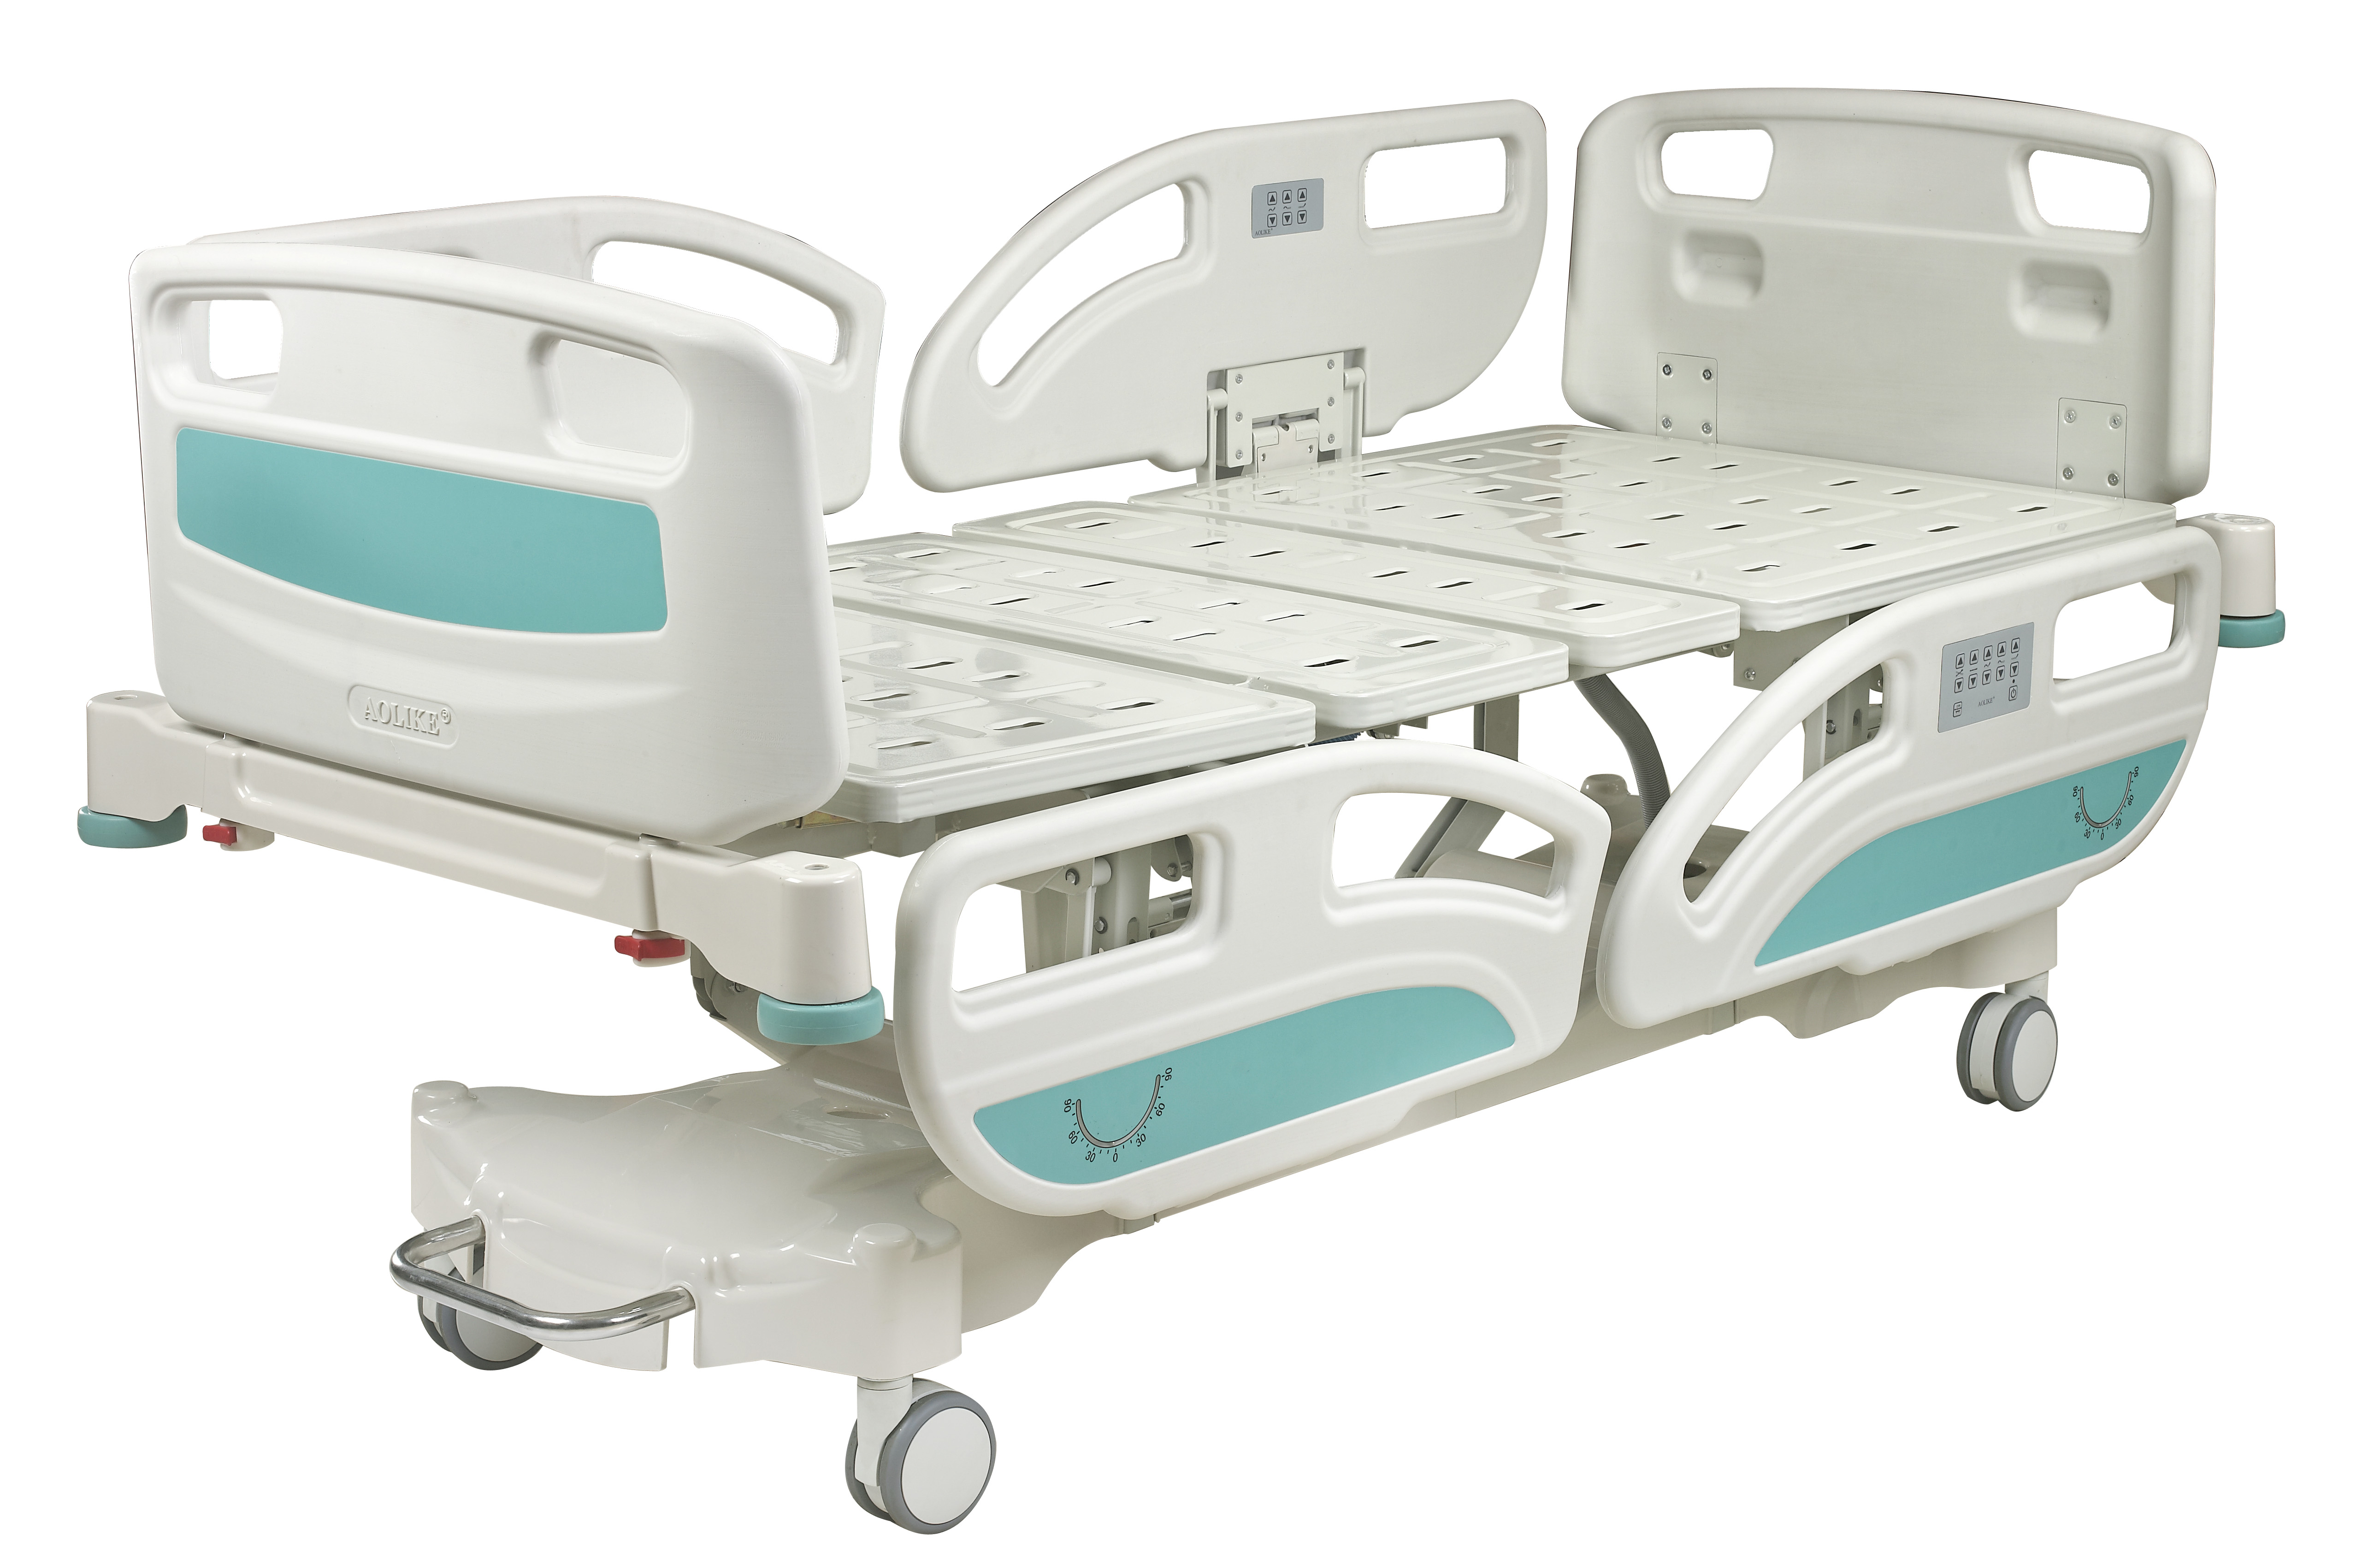 AOLIKE hospital ICU 5 functions electric hospital bed with CPR function